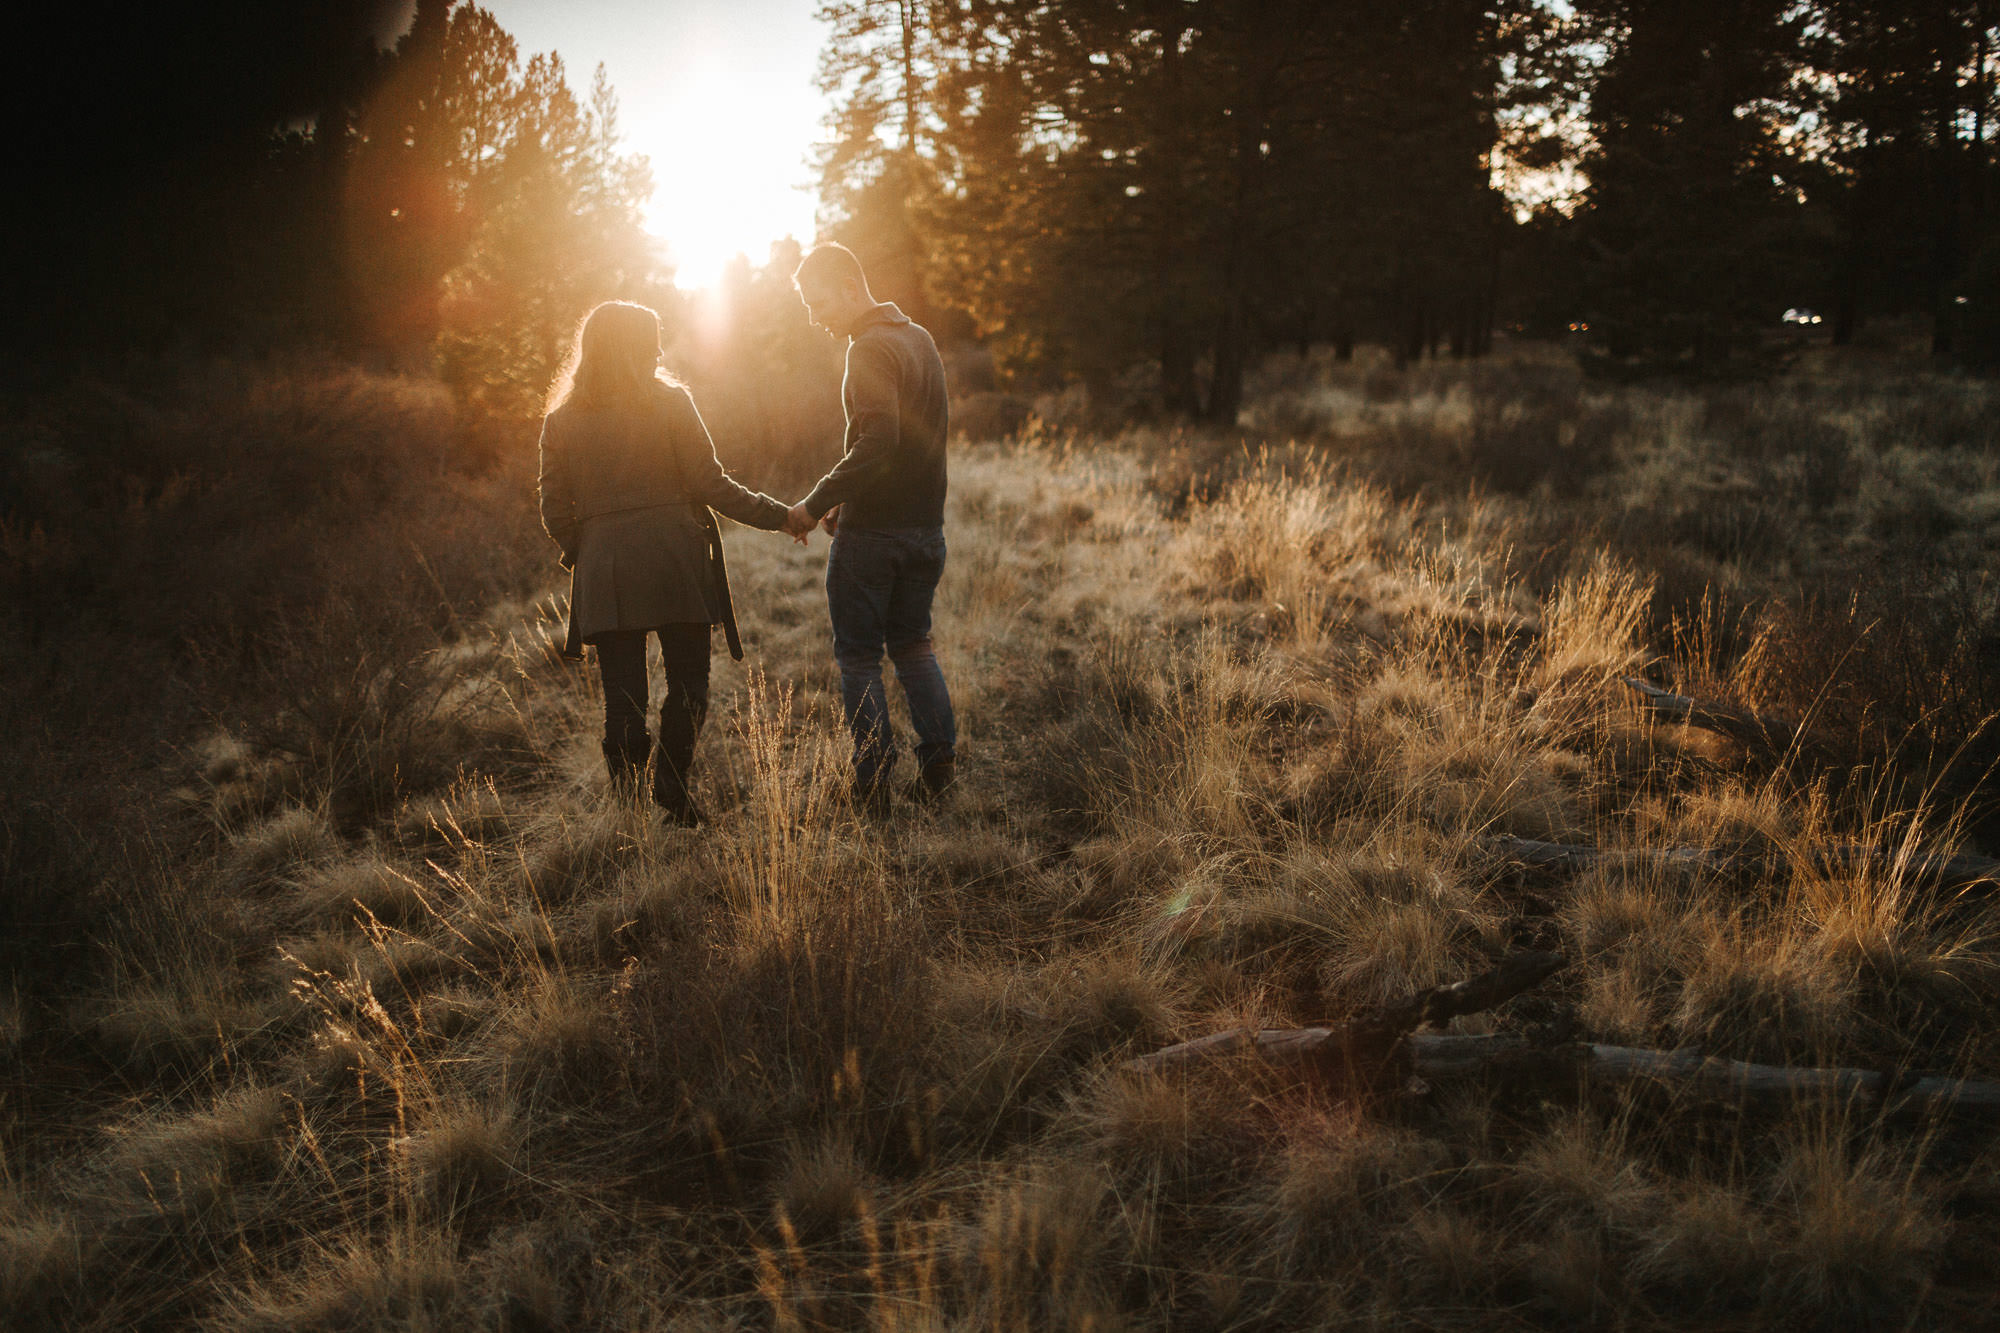 Couple walks through a field at sunset in Bend, Oregon